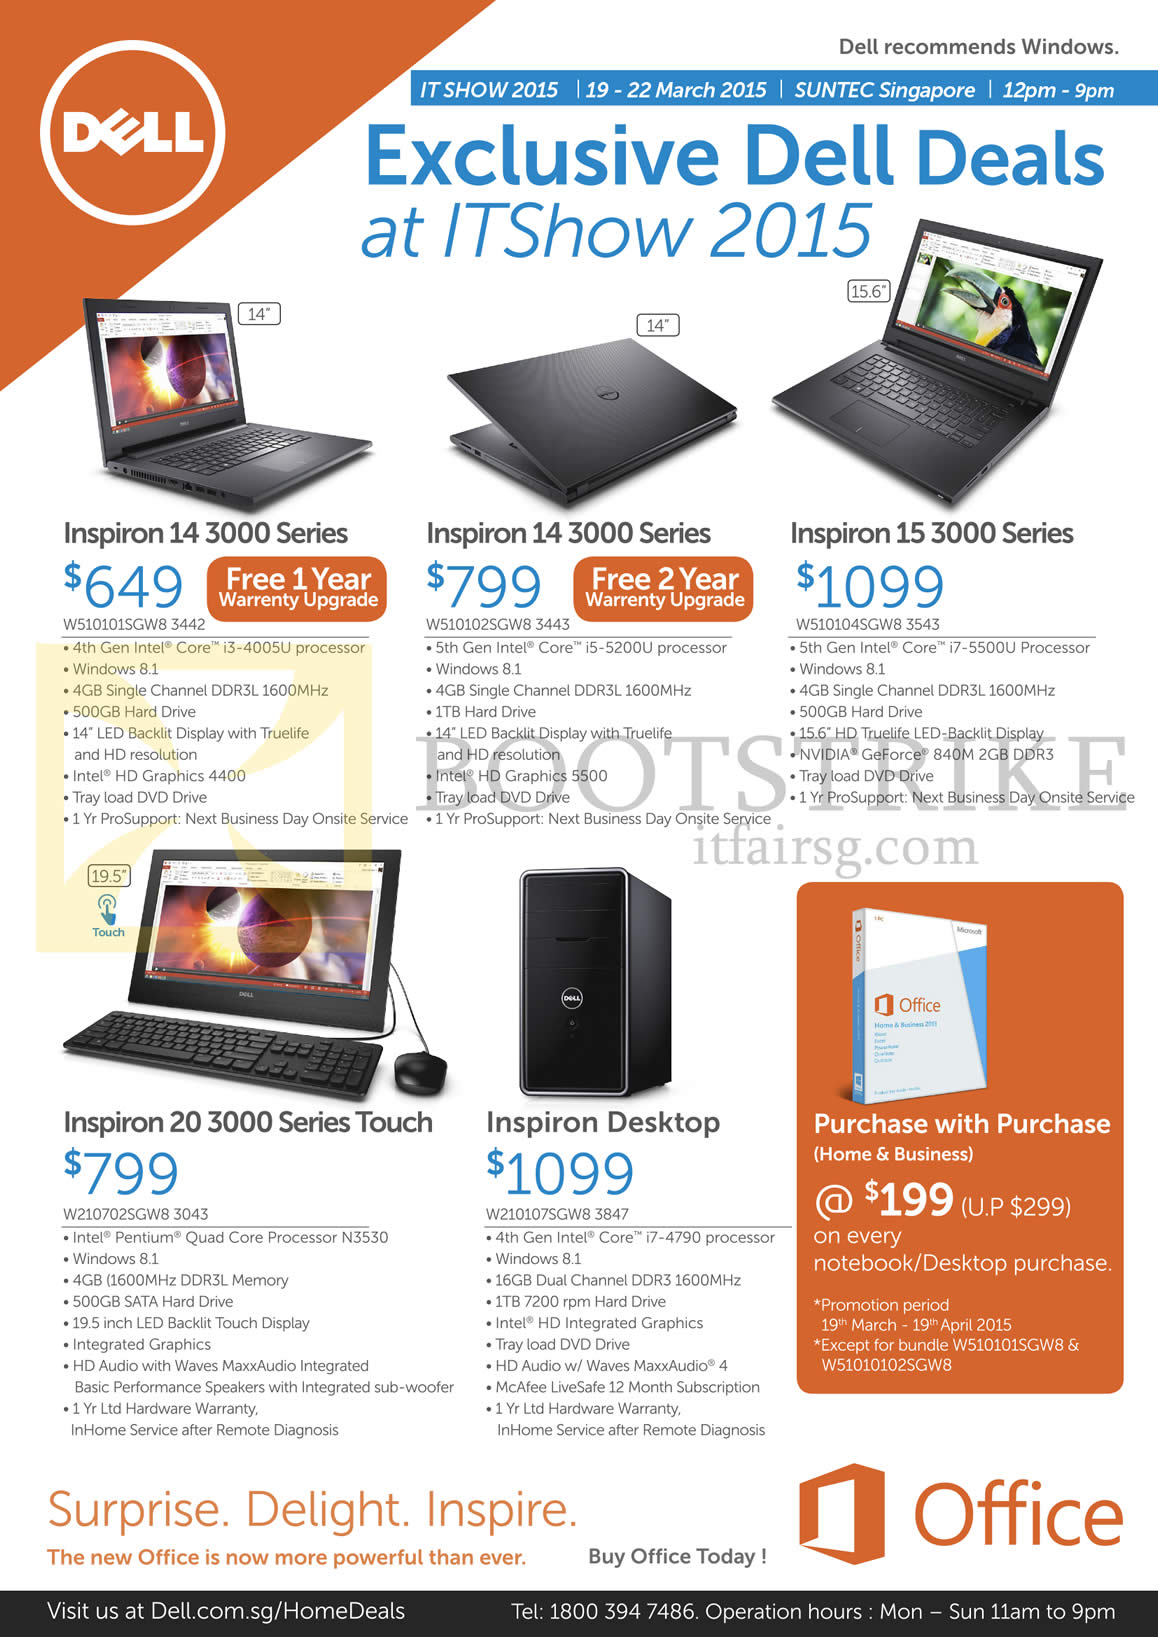 IT SHOW 2015 price list image brochure of Dell Notebooks, Desktop PC, Inspiron 14, 15, 20 3000 Series